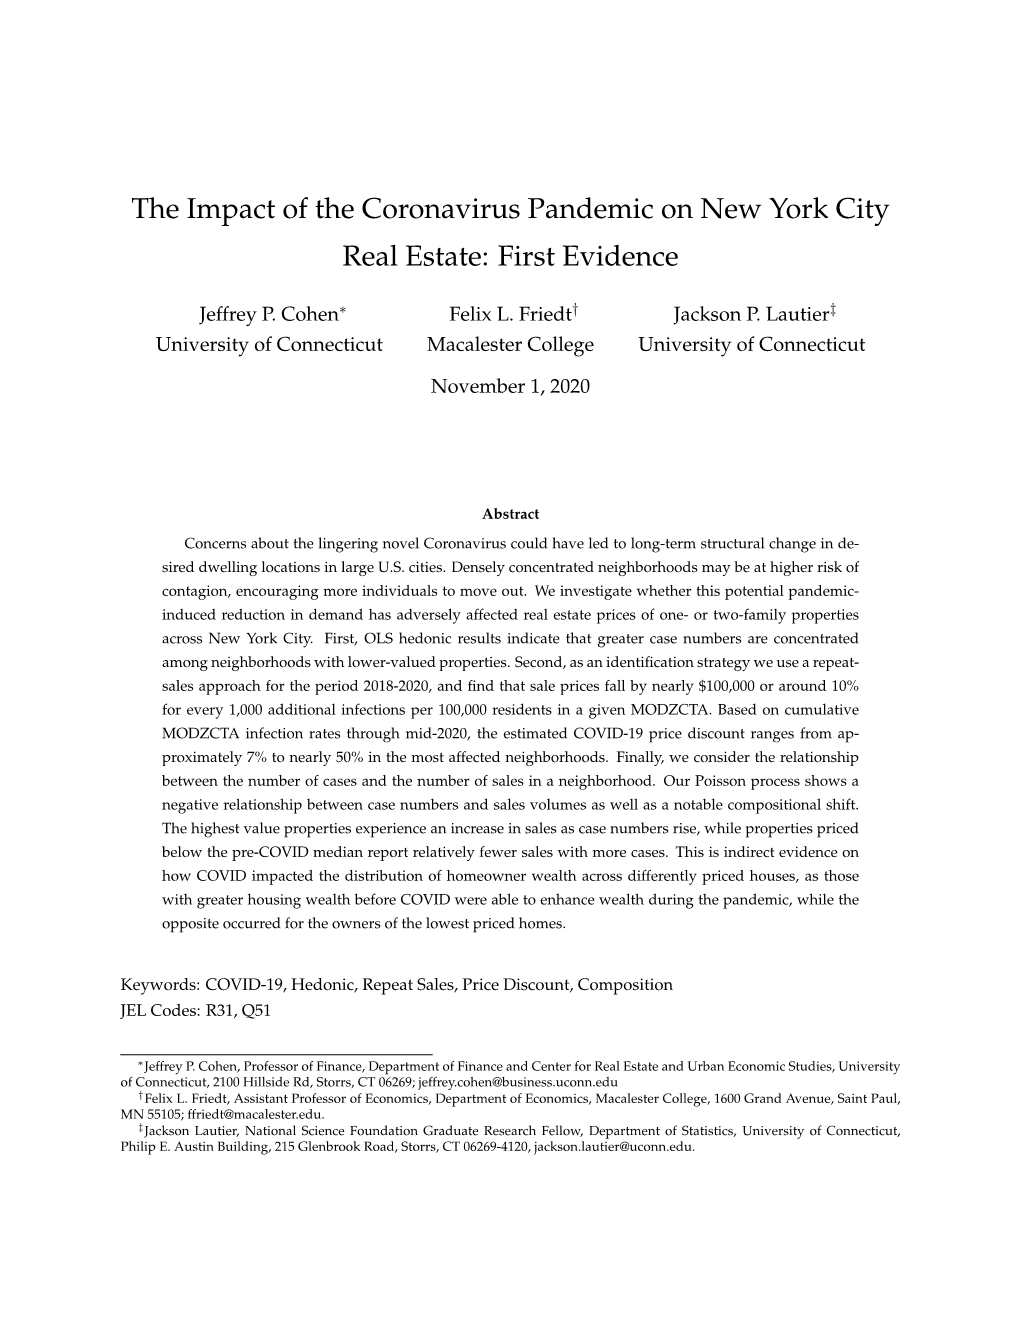 The Impact of the Coronavirus Pandemic on New York City Real Estate: First Evidence